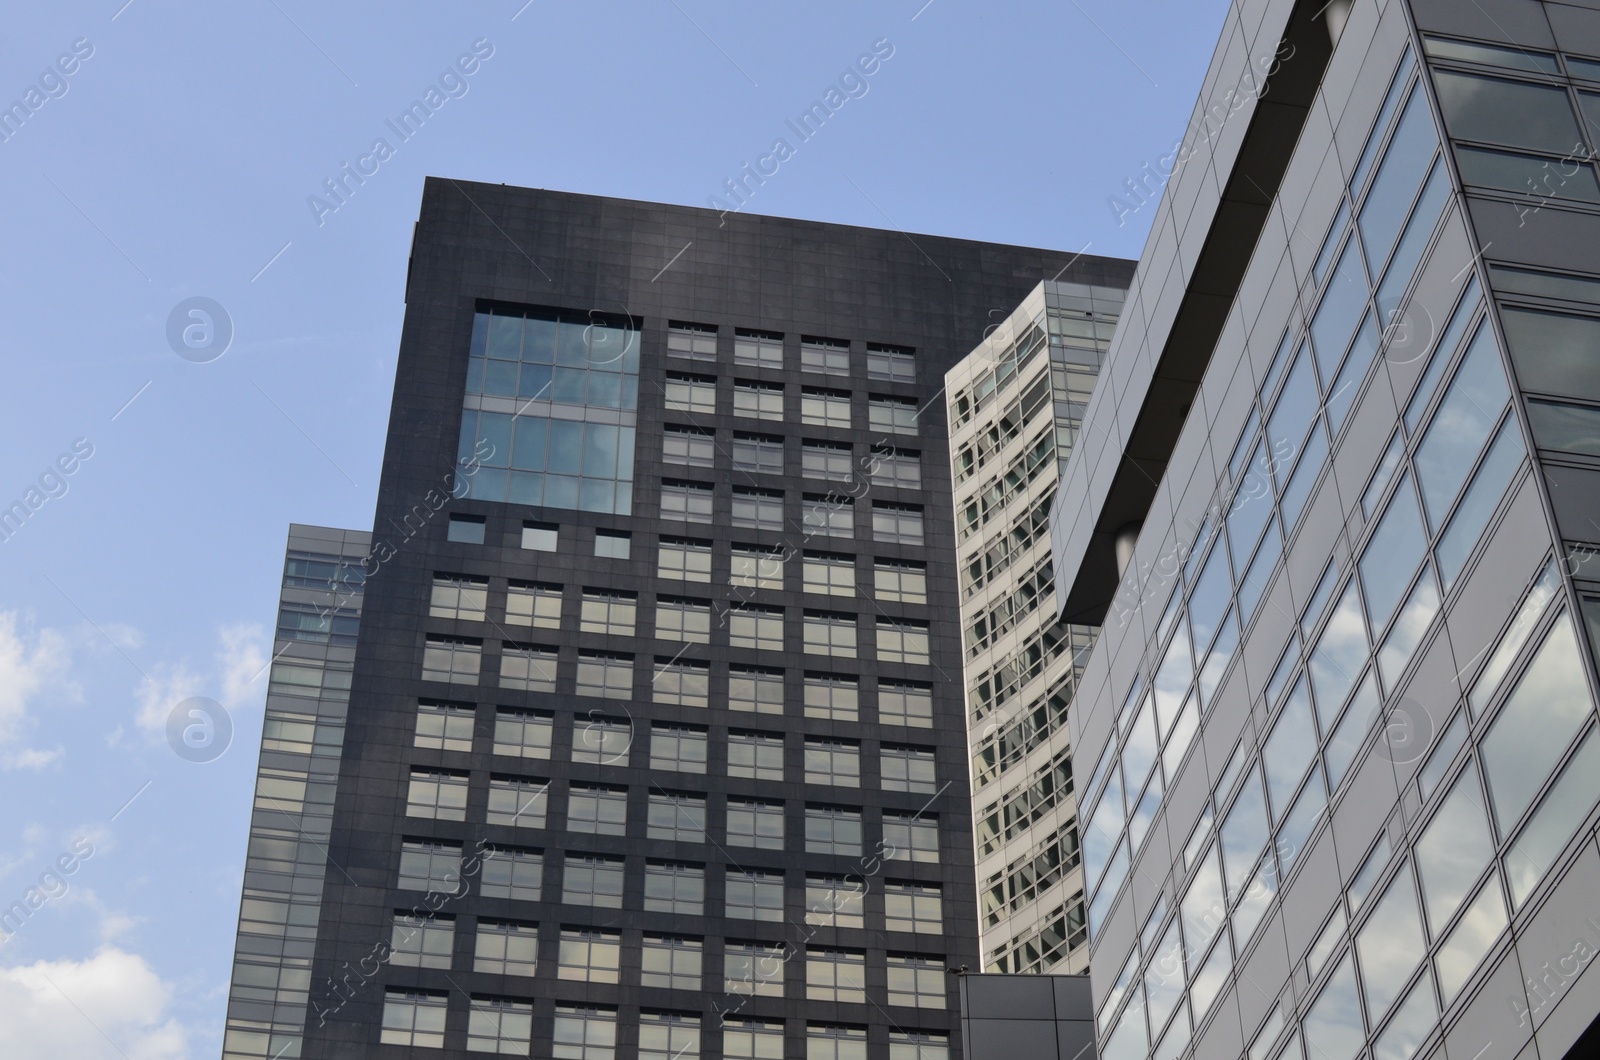 Photo of Exterior of beautiful modern skyscraper against blue sky, low angle view